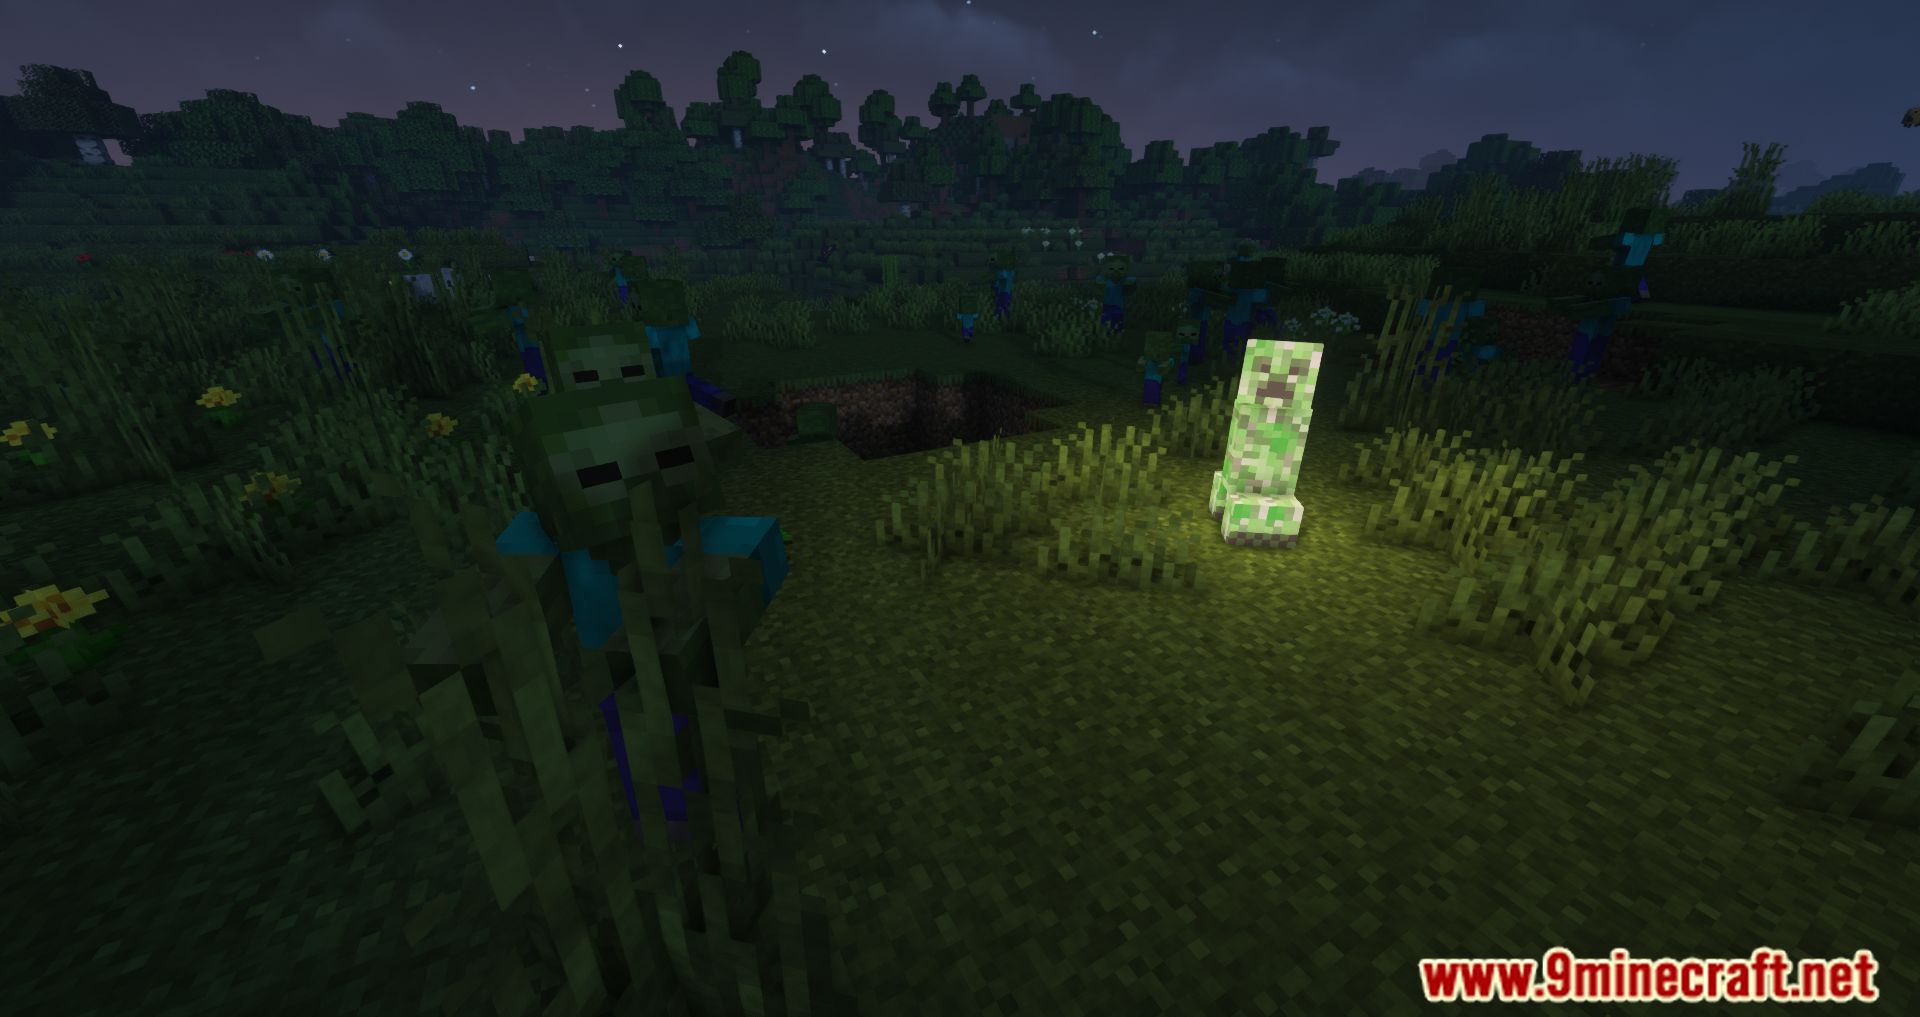 Well-Behaved Mobs Mod (1.16.5, 1.15.2) - Minor Tweaks To The Behavior Of A Few Mobs 12